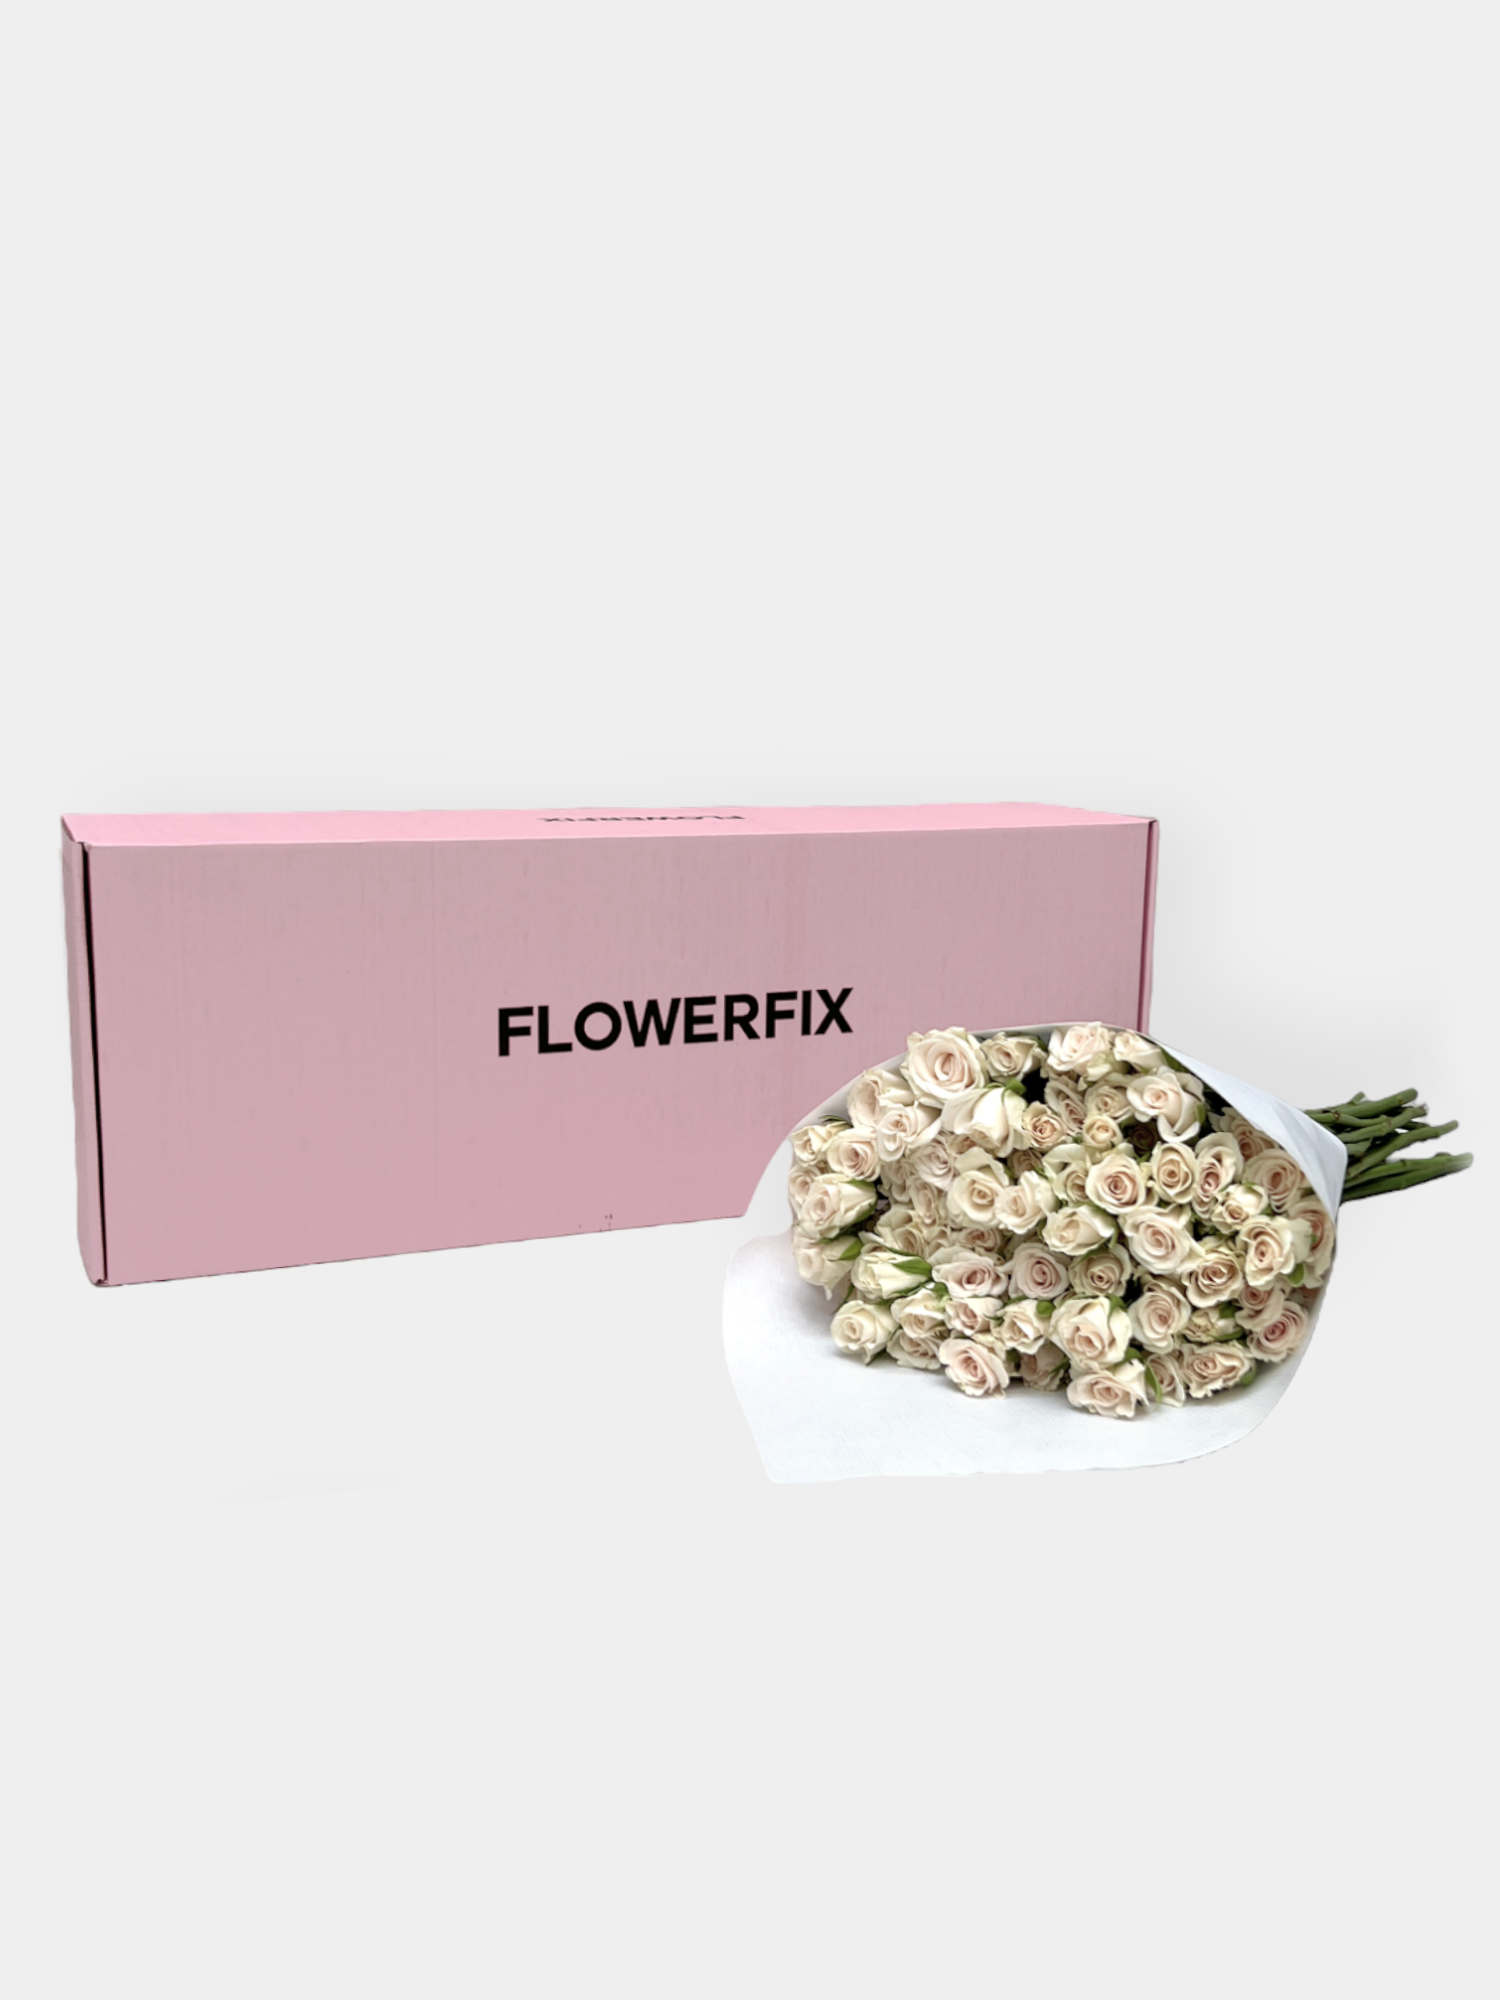 Only Roses Subscription - FLOWERFIX